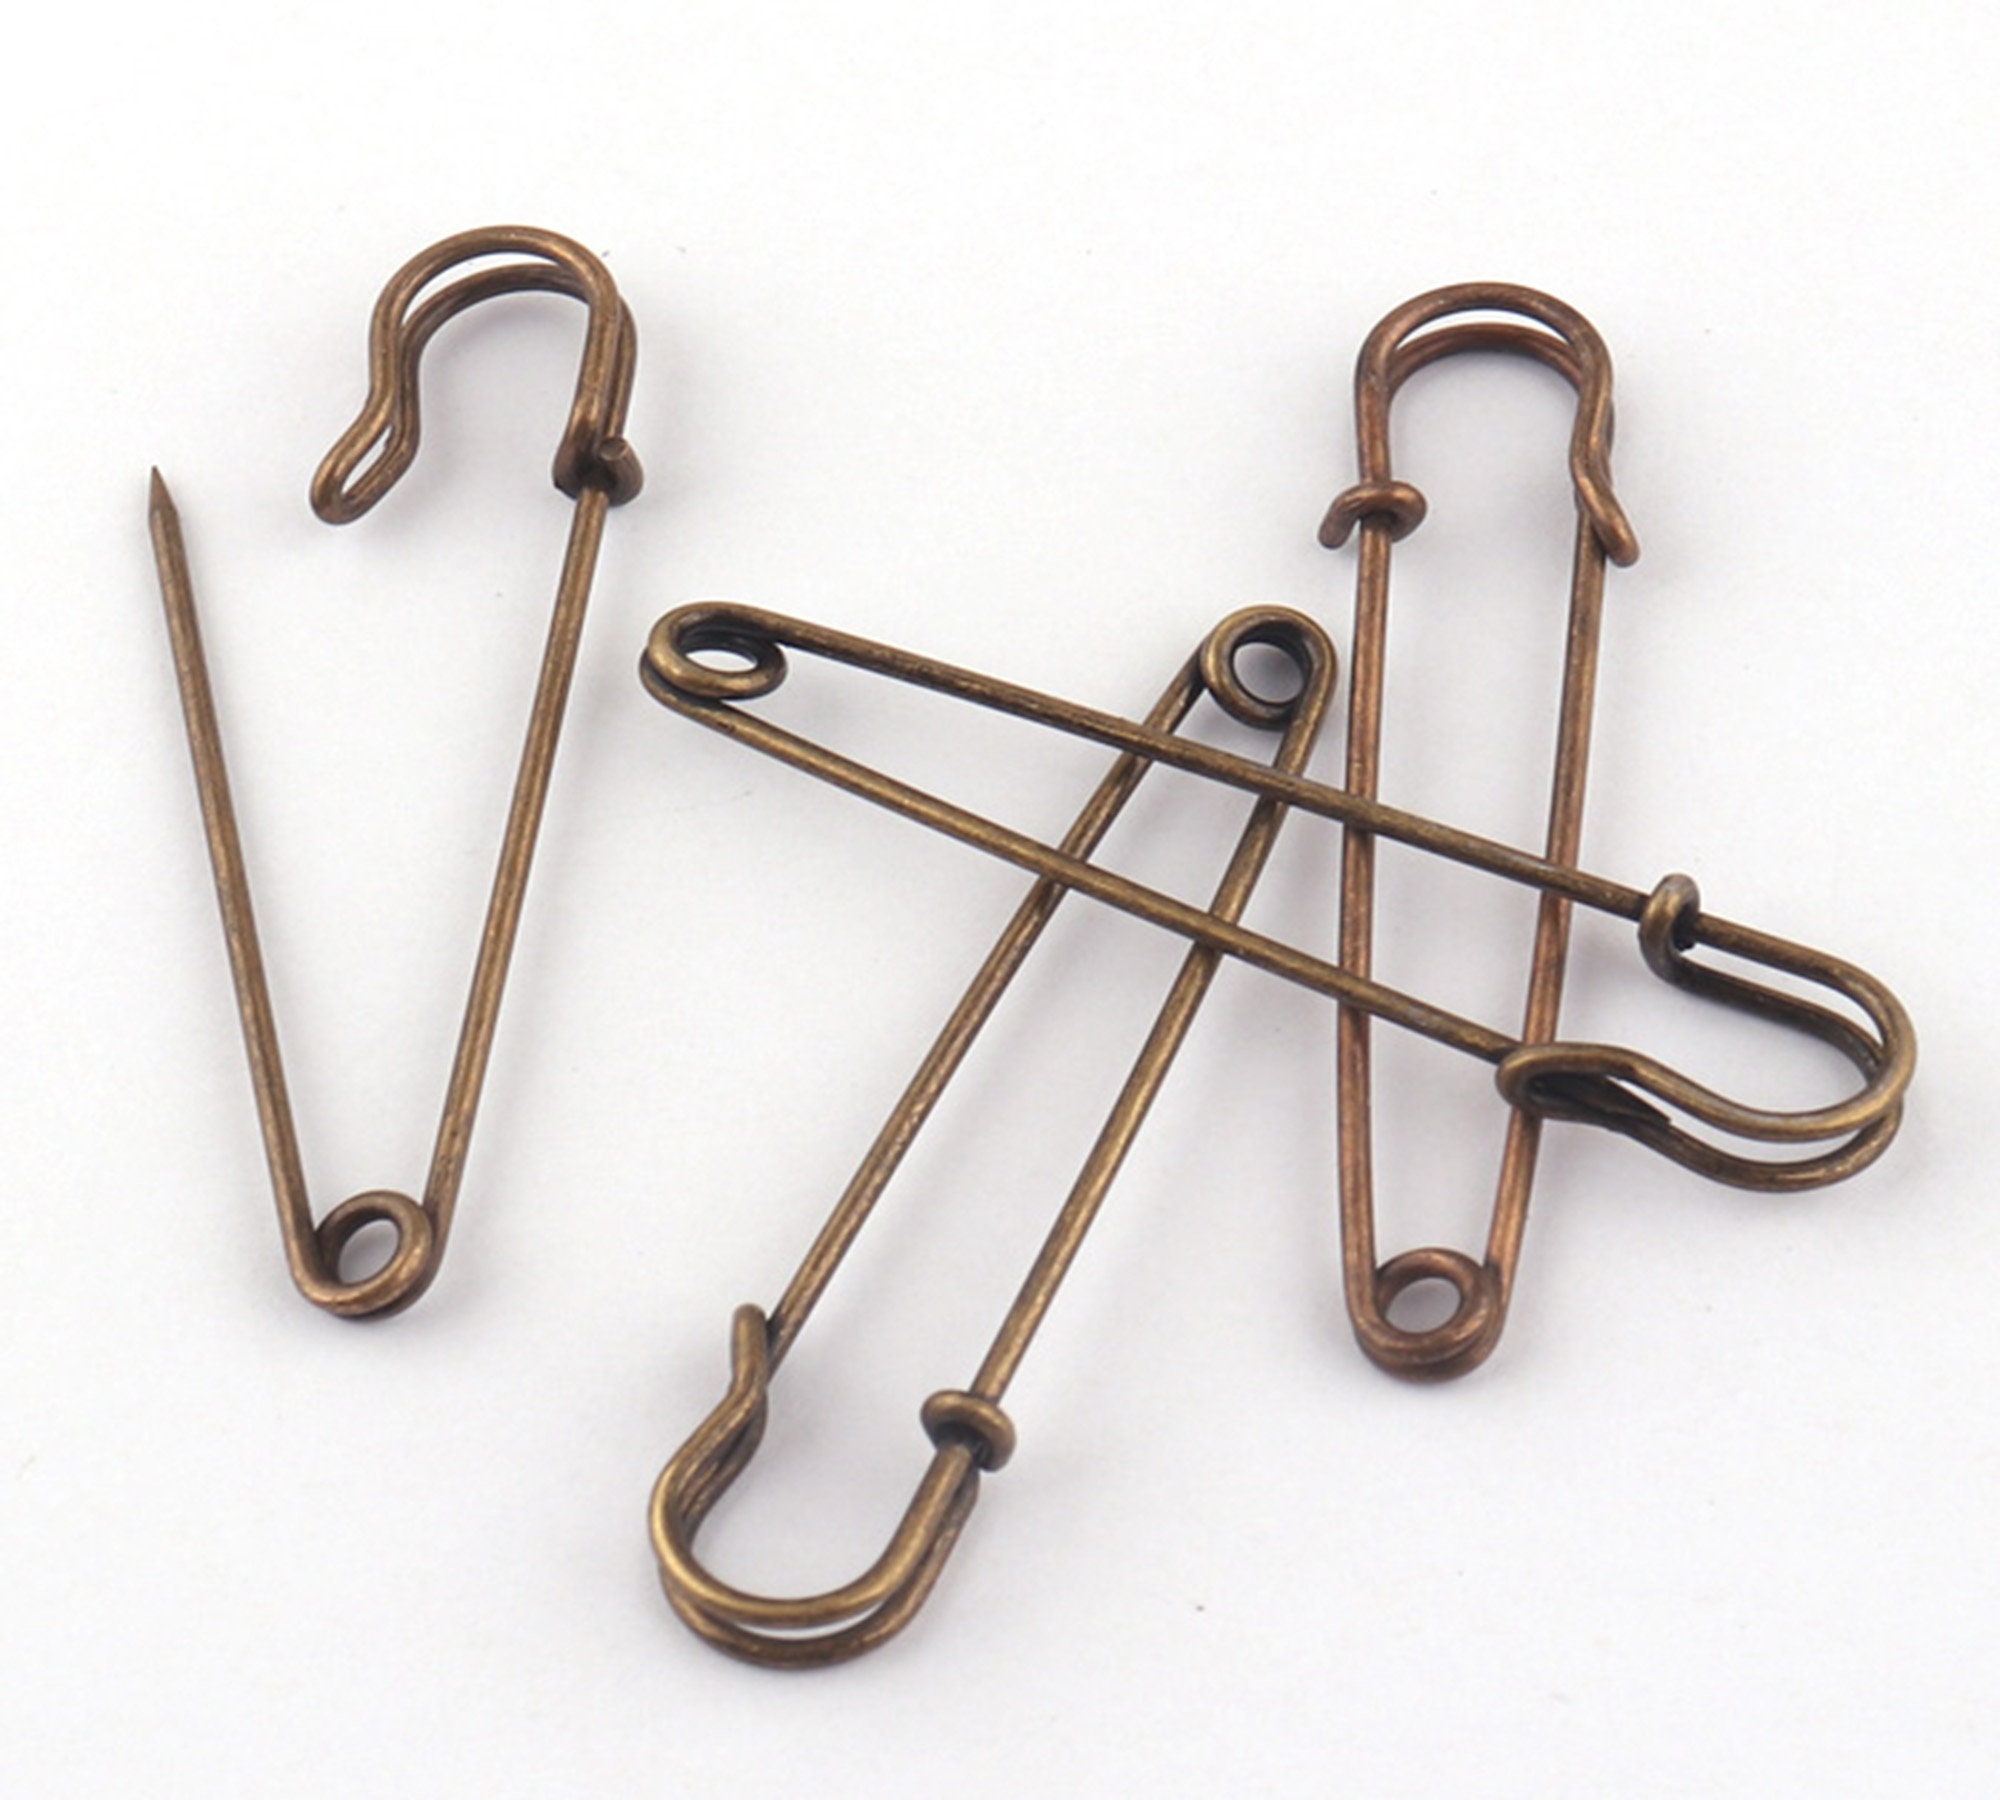 Silver Safety Pins Size 2 - 1.5 inch 144 Pieces Premium Quality